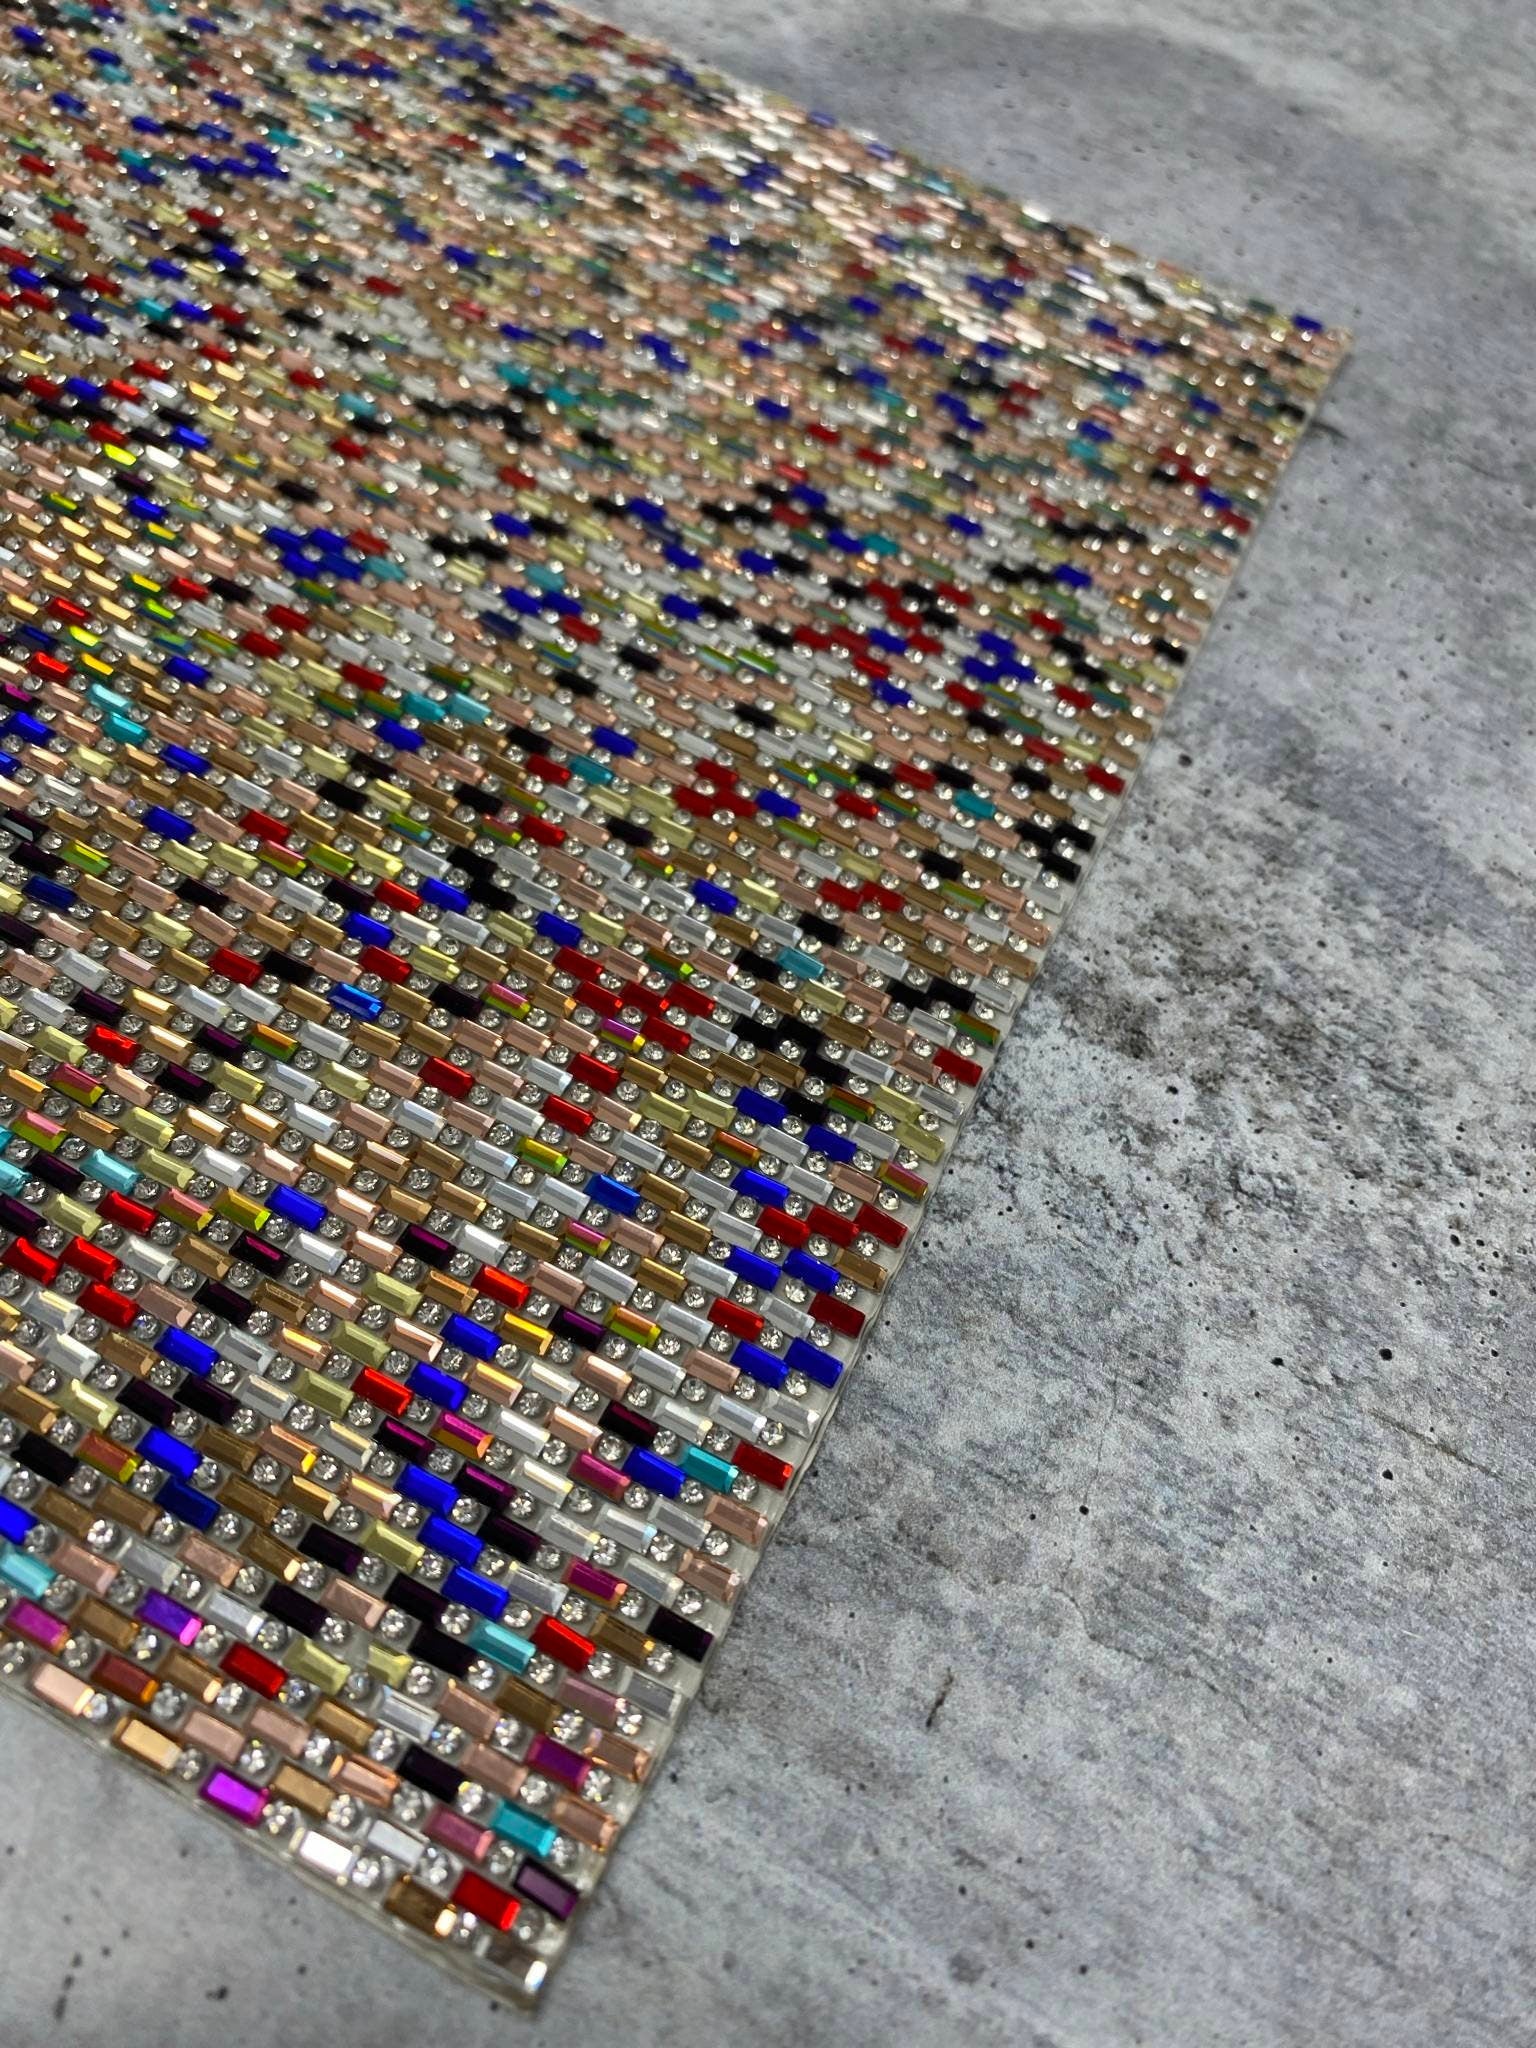 Square Colorful Stones, Self-Adhesive Rhinestone Sheet, for Crafts: Blinging Clothes, Shoes, Handbags, Mugs & Wine Glasses,Size  10" x 16.5"